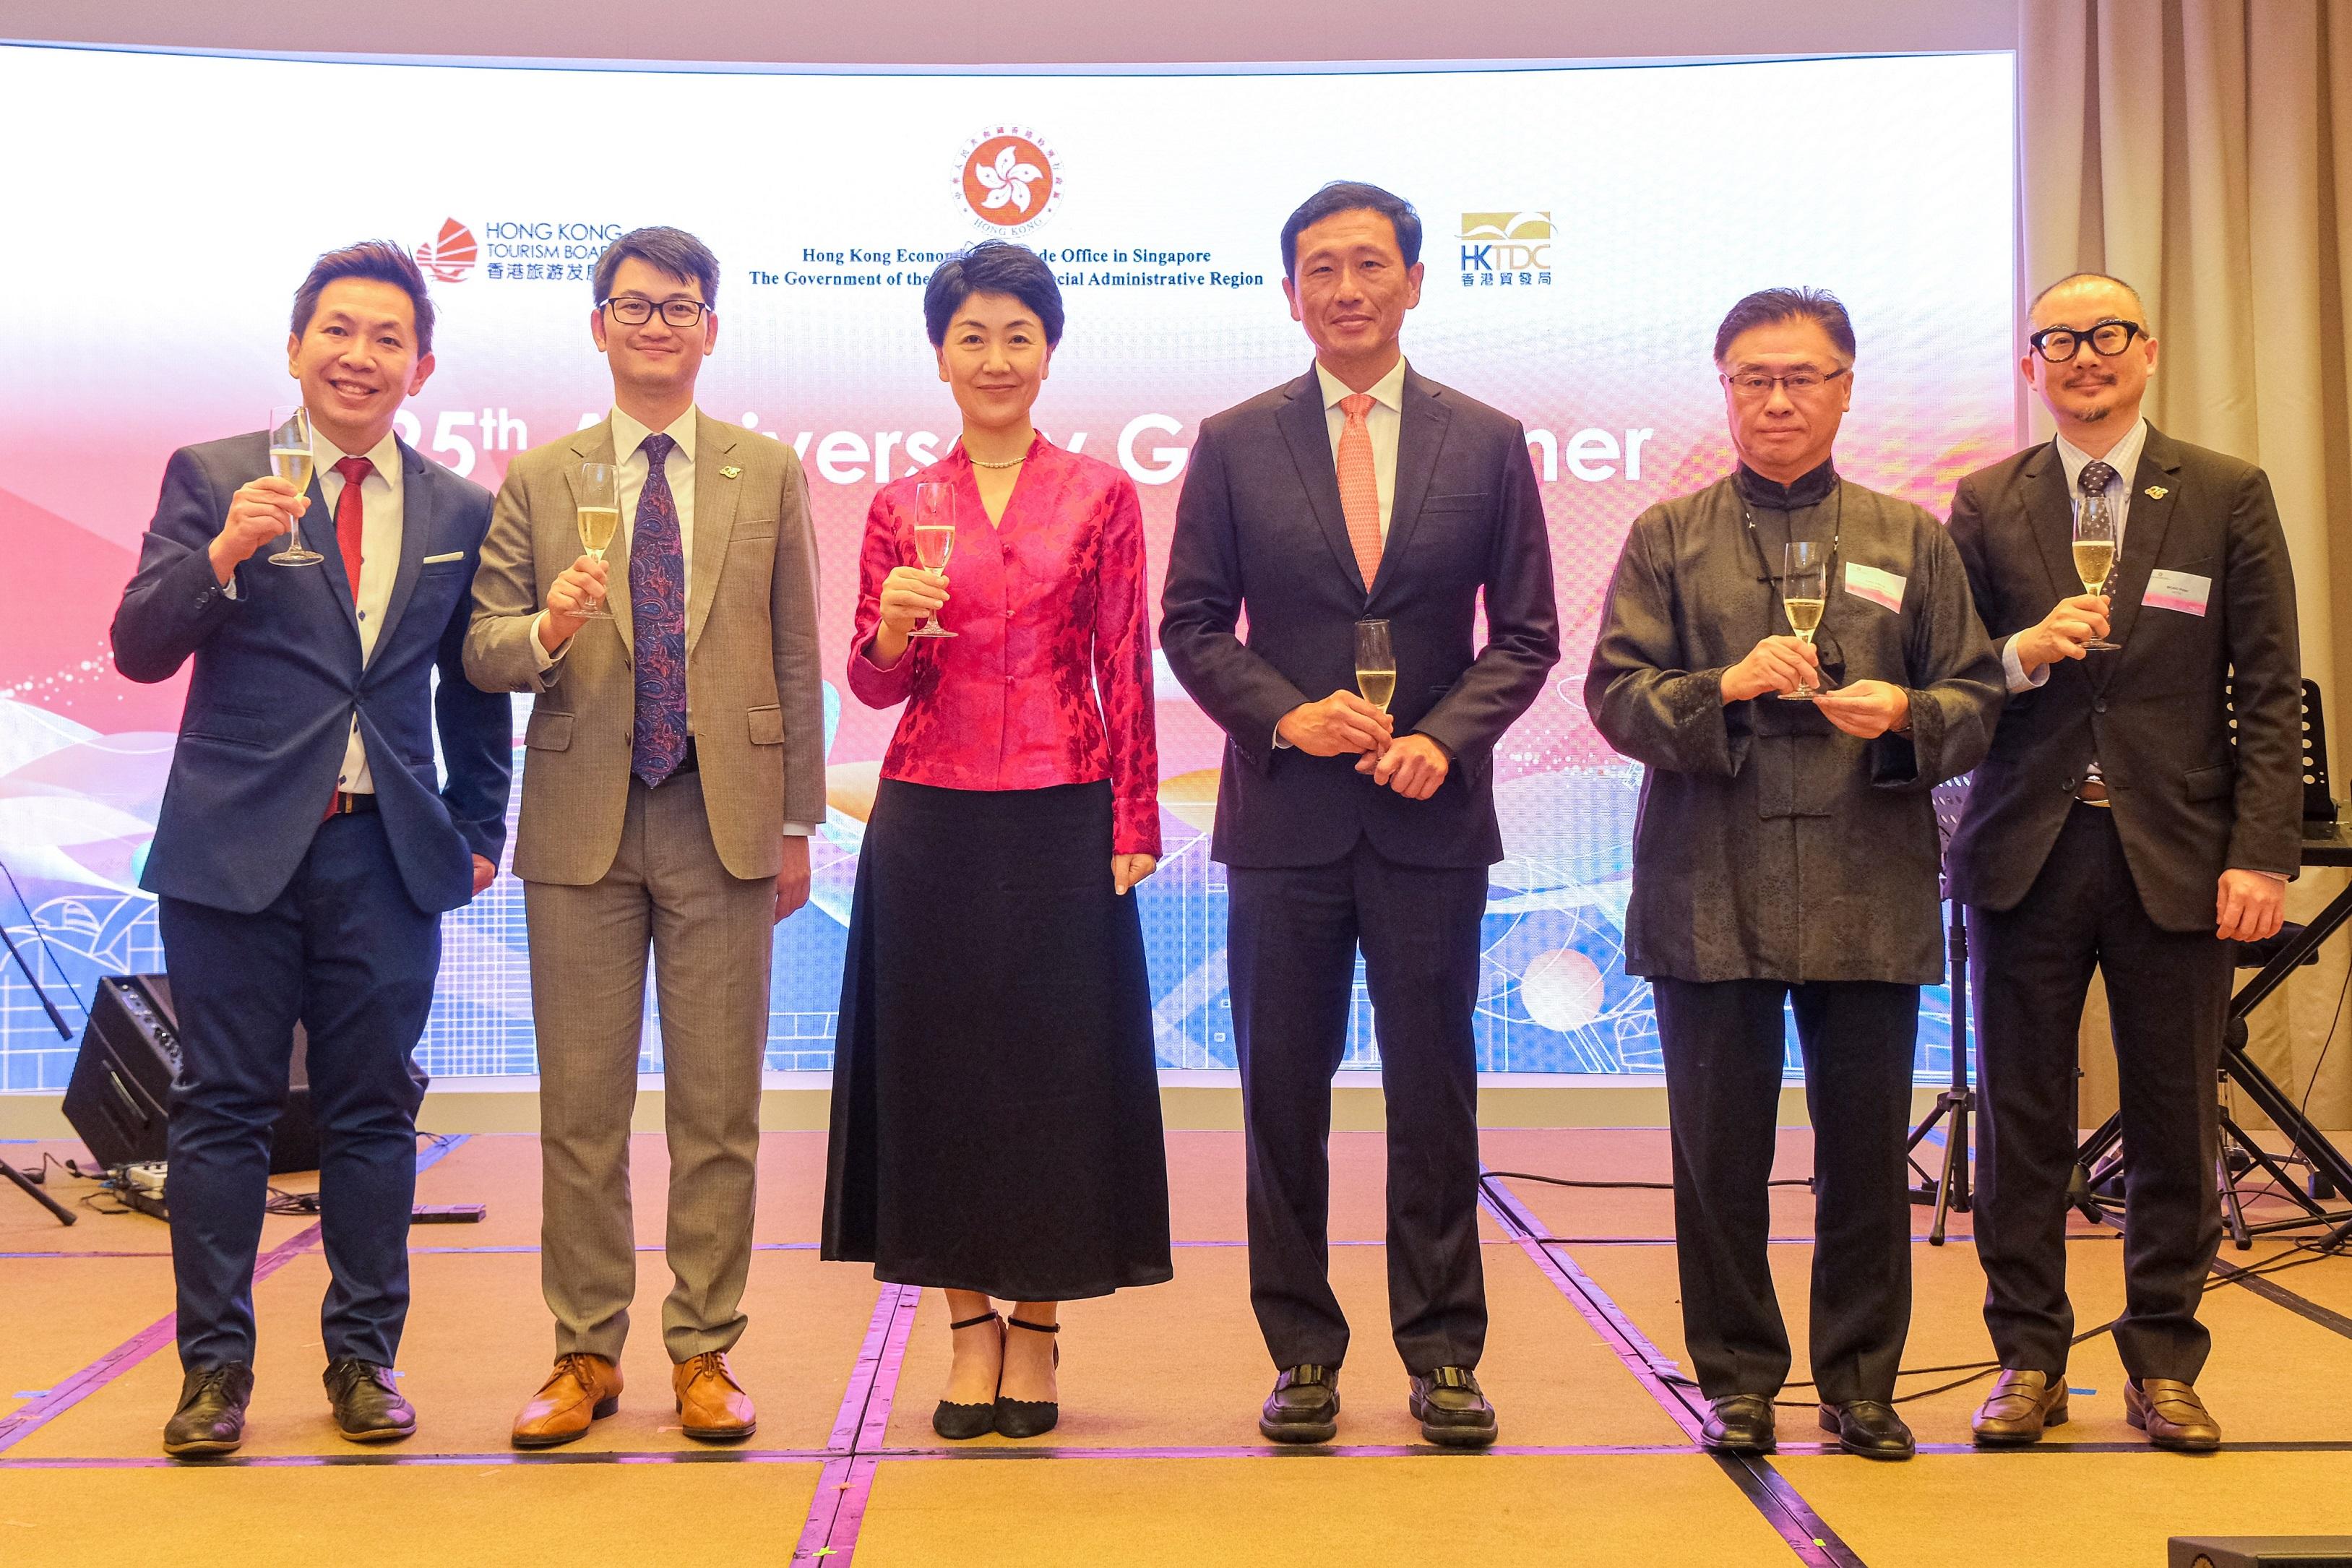 The Hong Kong Economic and Trade Office in Singapore (Singapore ETO) hosted a gala dinner in Singapore today (August 3) in celebration of the 25th anniversary of the establishment of the Hong Kong Special Administrative Region. Photo shows the Director of the Singapore ETO, Mr Wong Chun To (second left), with the Chinese Ambassador to Singapore, Ms Sun Haiyan (third left); the Minister for Health of Singapore, Mr Ong Ye Kung (third right); Chairman of Hong Kong-Singapore Business Association, Mr Dennis Chiu (second right); the Regional Director of Southeast Asia and South Asia of the Hong Kong Trade Development Council, Mr Peter Wong (first right); and the Head of Marketing & Communications of Southeast Asia of Hong Kong Tourism Board, Mr Martin Gwee (first left).